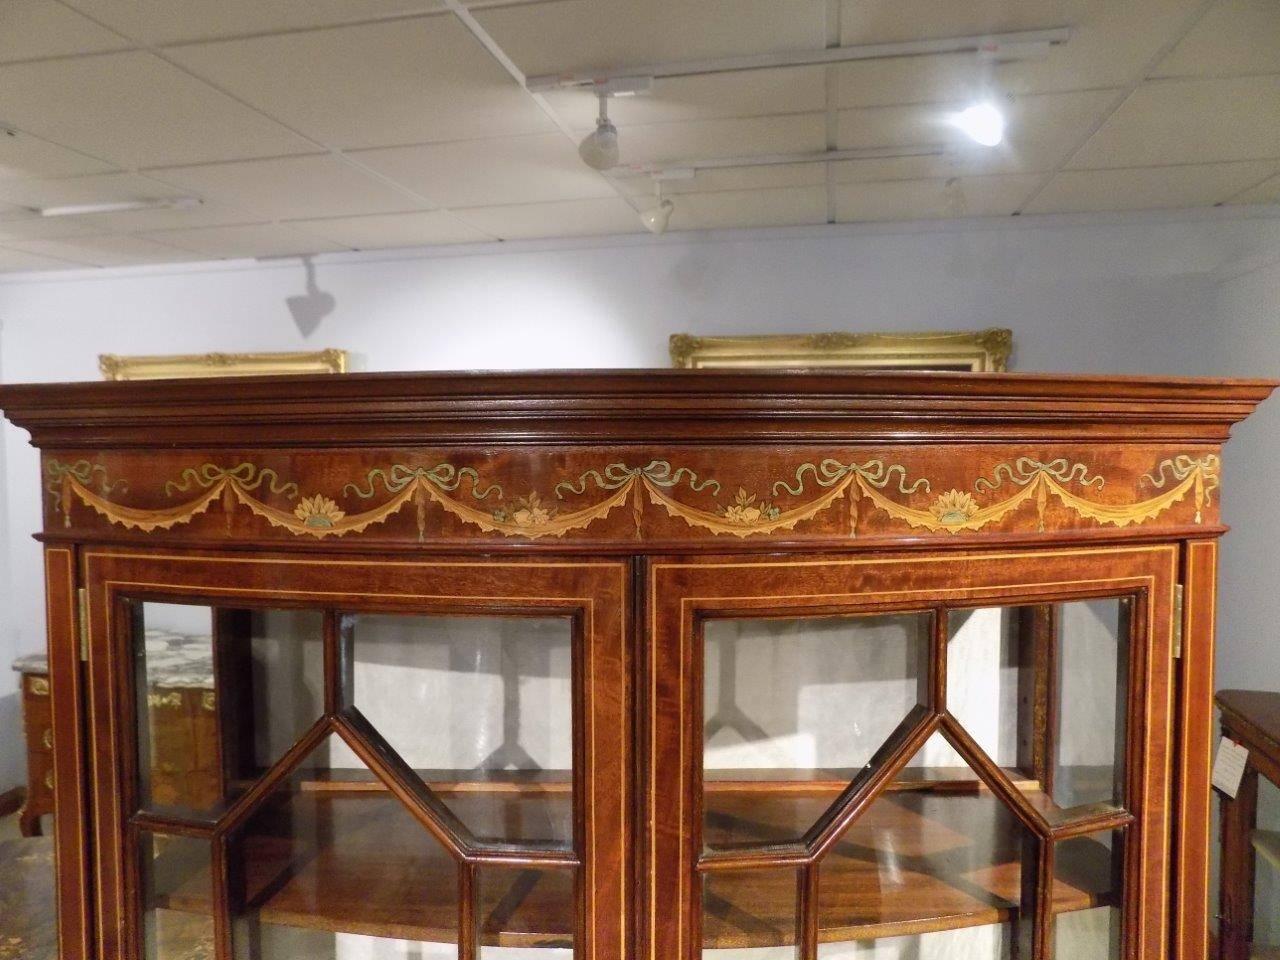 A superb quality mahogany and marquetry inlaid bow front display cabinet on stand. The upper section with a moulded cornice above a ribbon and swag marquetry and pen-work inlaid frieze with twin bow front astragal glazed doors, opens to reveal a